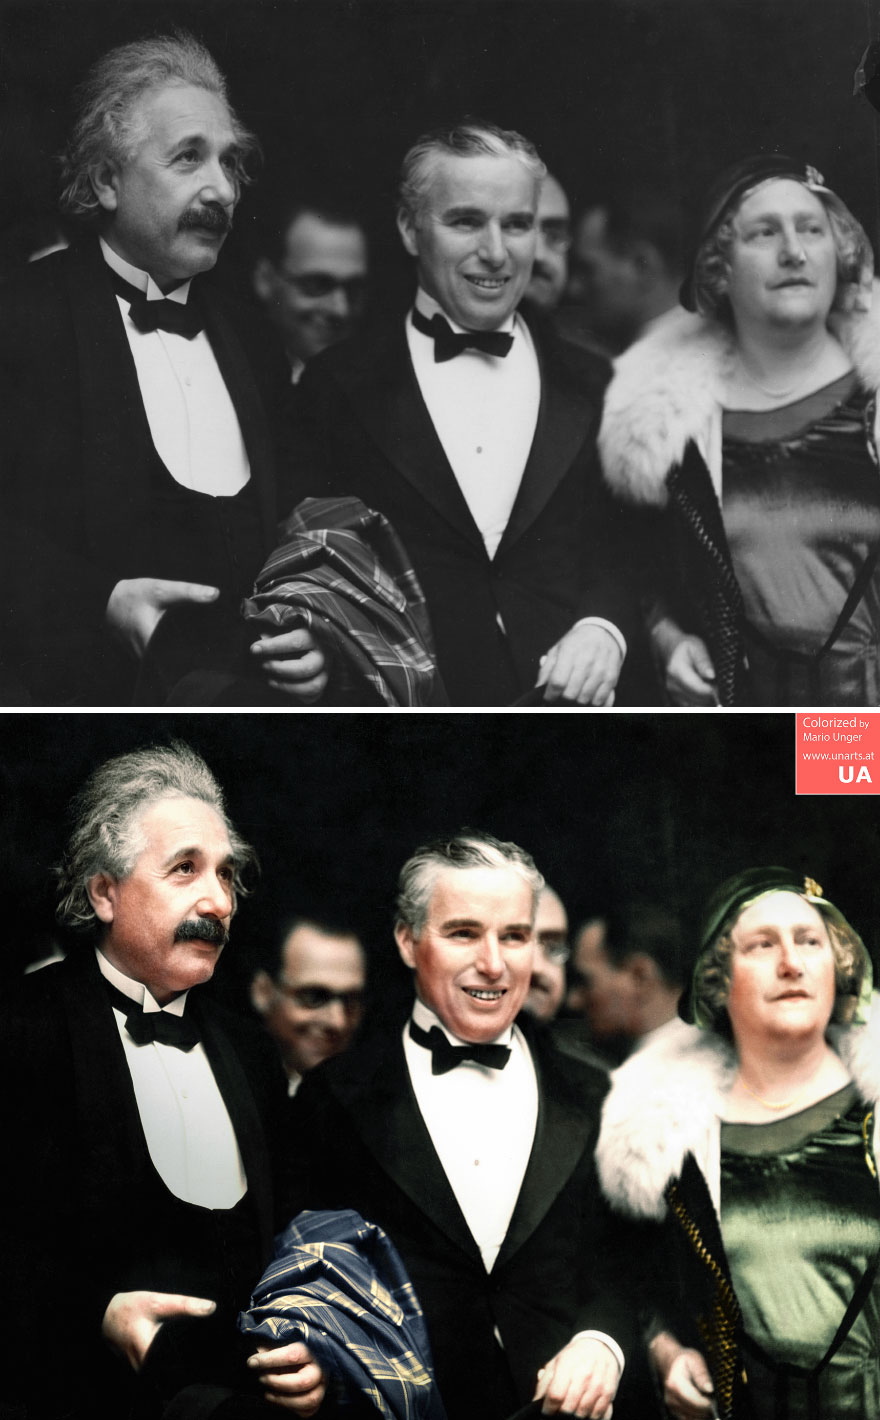 Albert Einstein, His Wife Elsa And Charlie Chaplin At The Premiere Of "City Lights" In Los Angeles, 1931